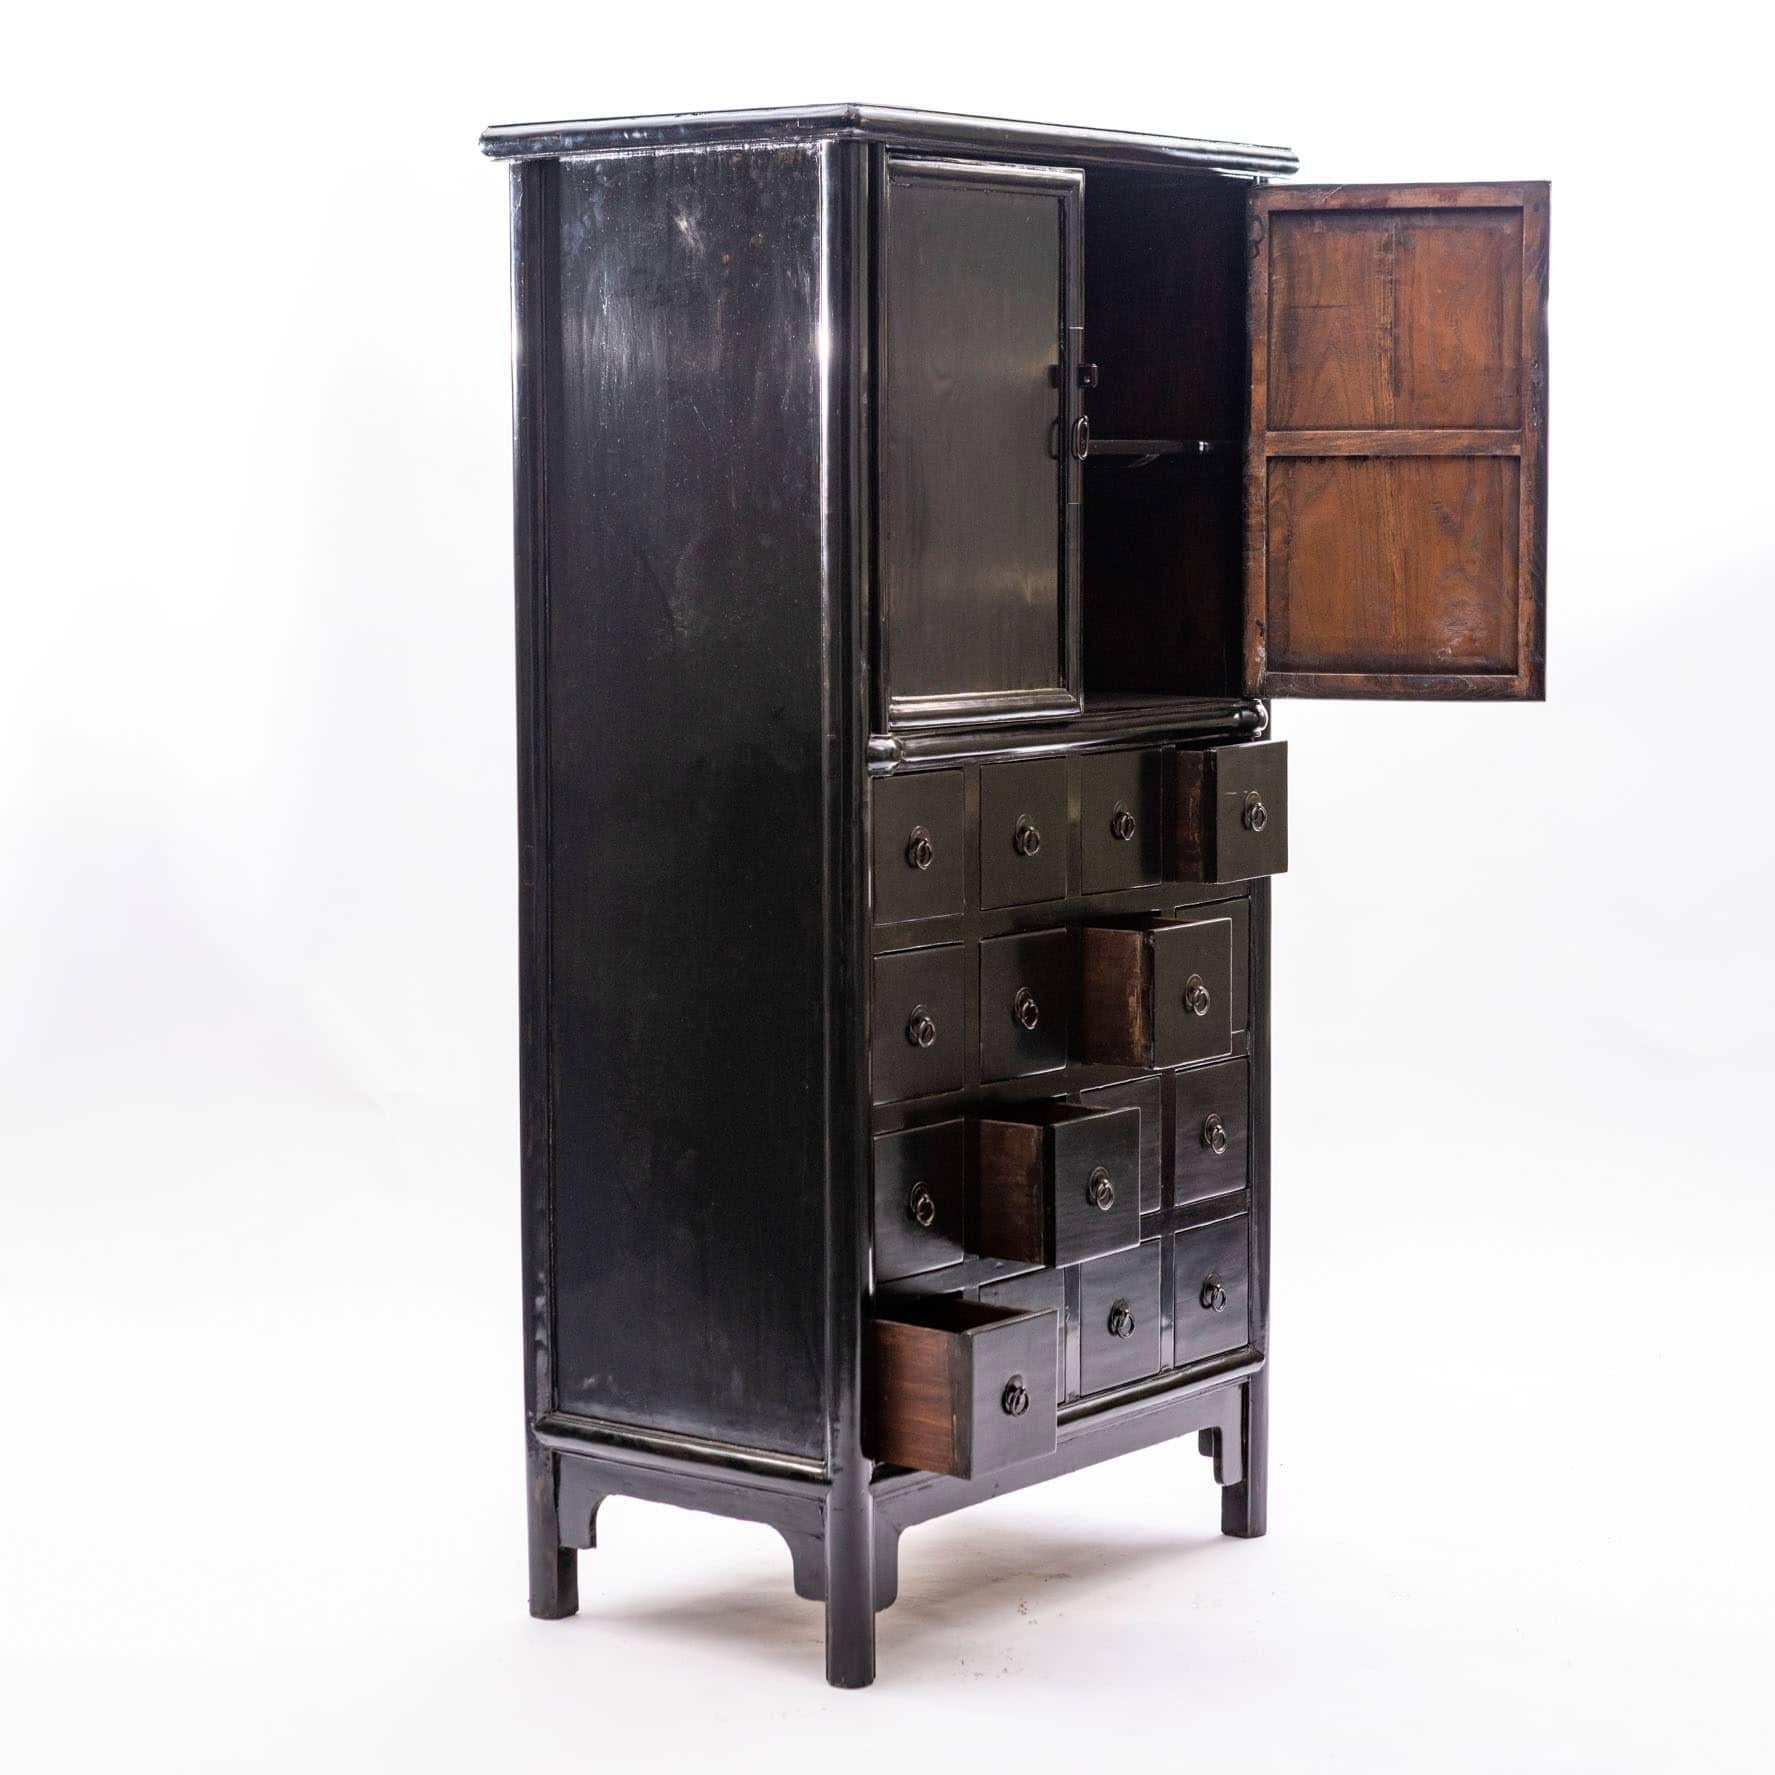 Lacquered Antique Chinese Pharmacy Cabinet, Black Lacquer, c 1860-1880